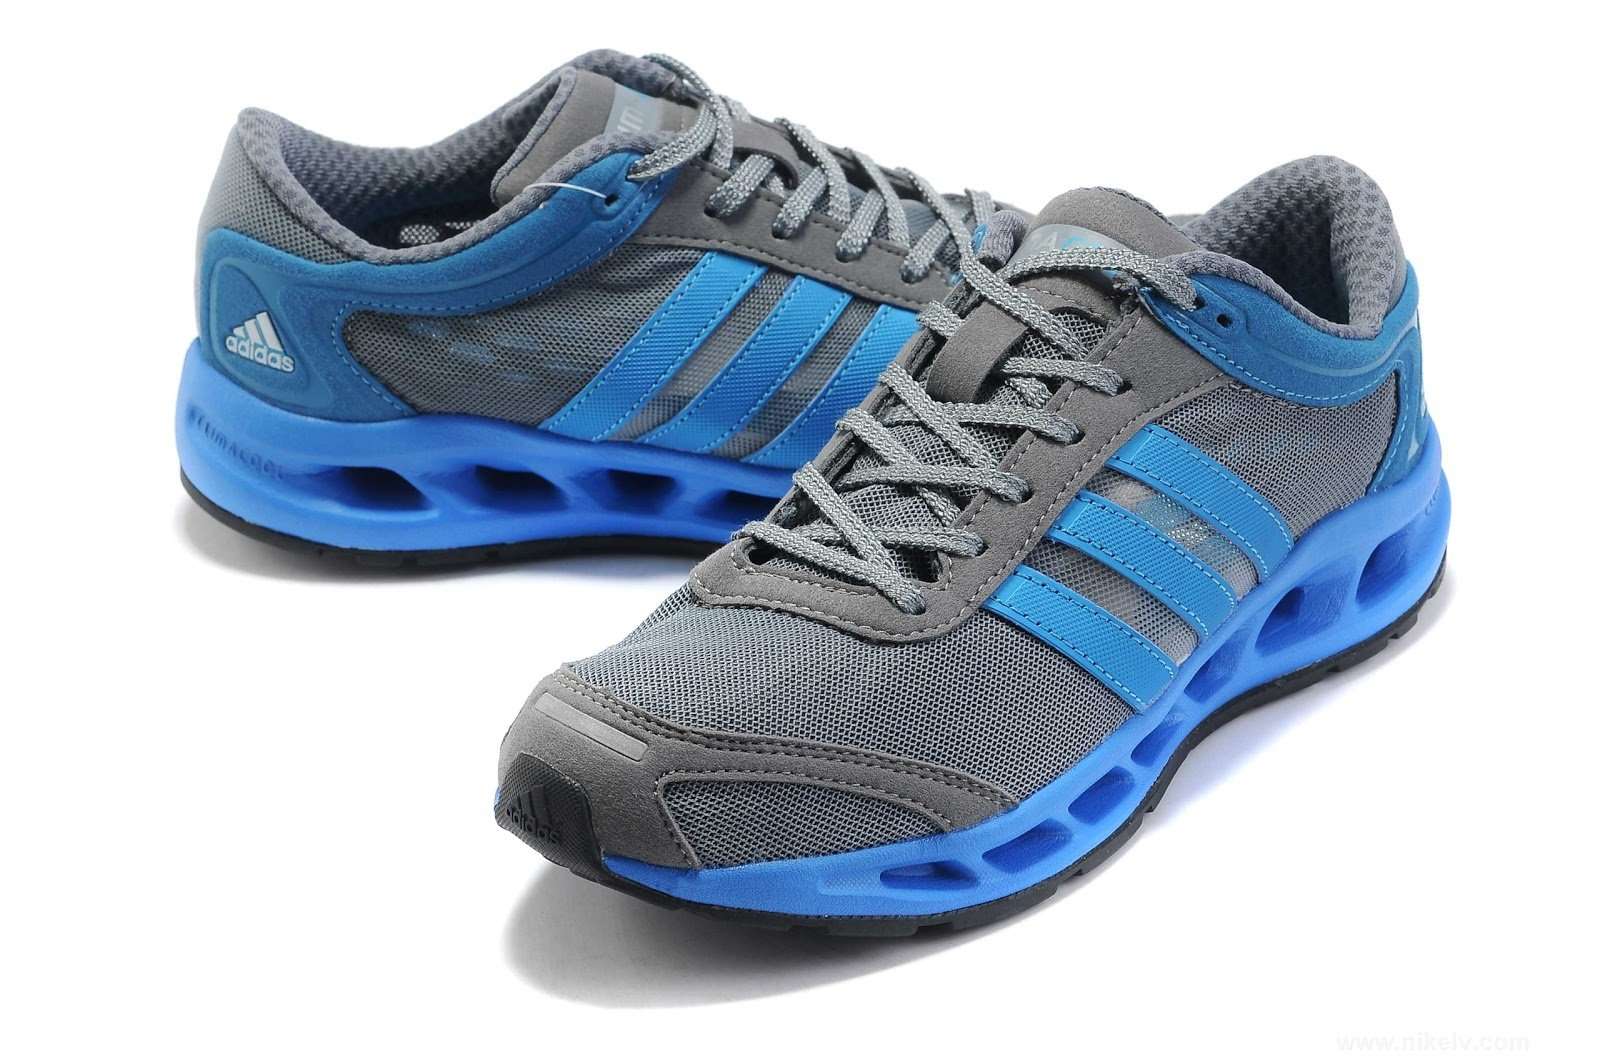 Best Sport Running Shoes: Adidas Running Shoes Are ...